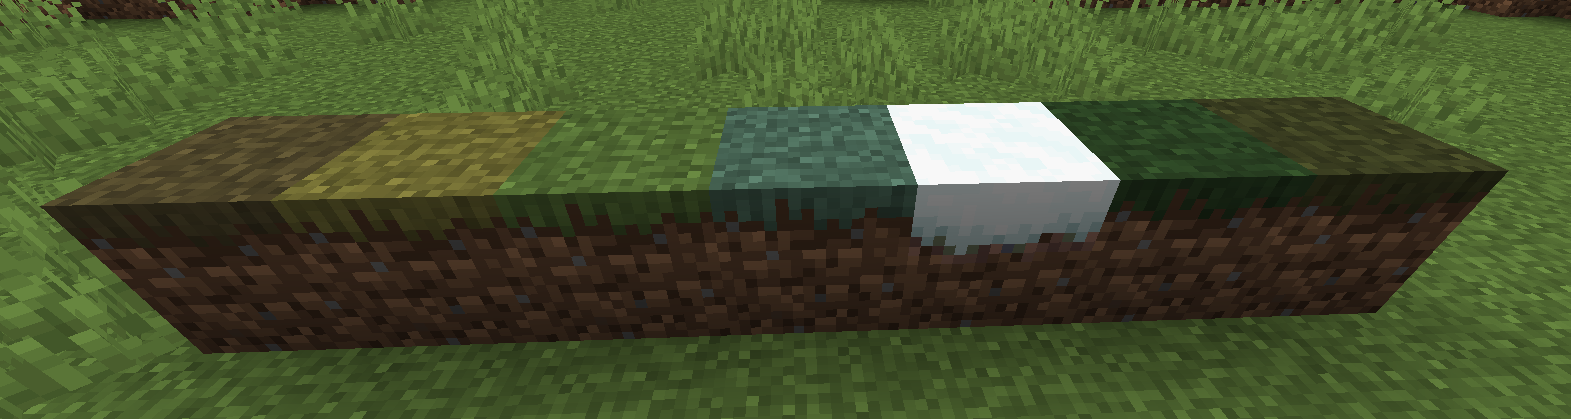 Top view of the grass blocks